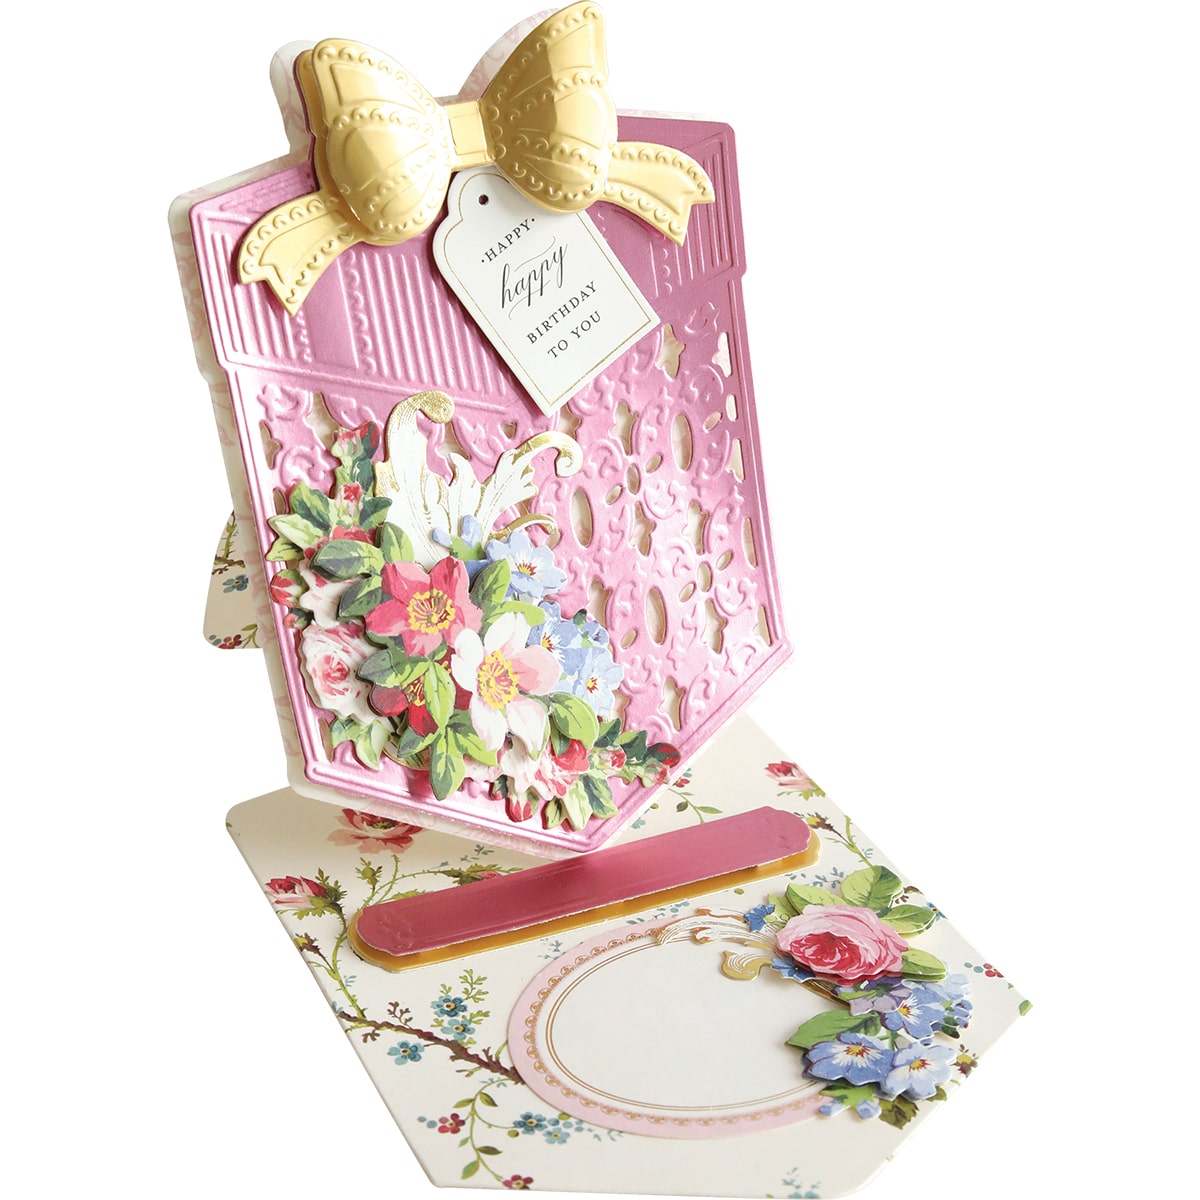 A pink card with a bow and flowers on it.